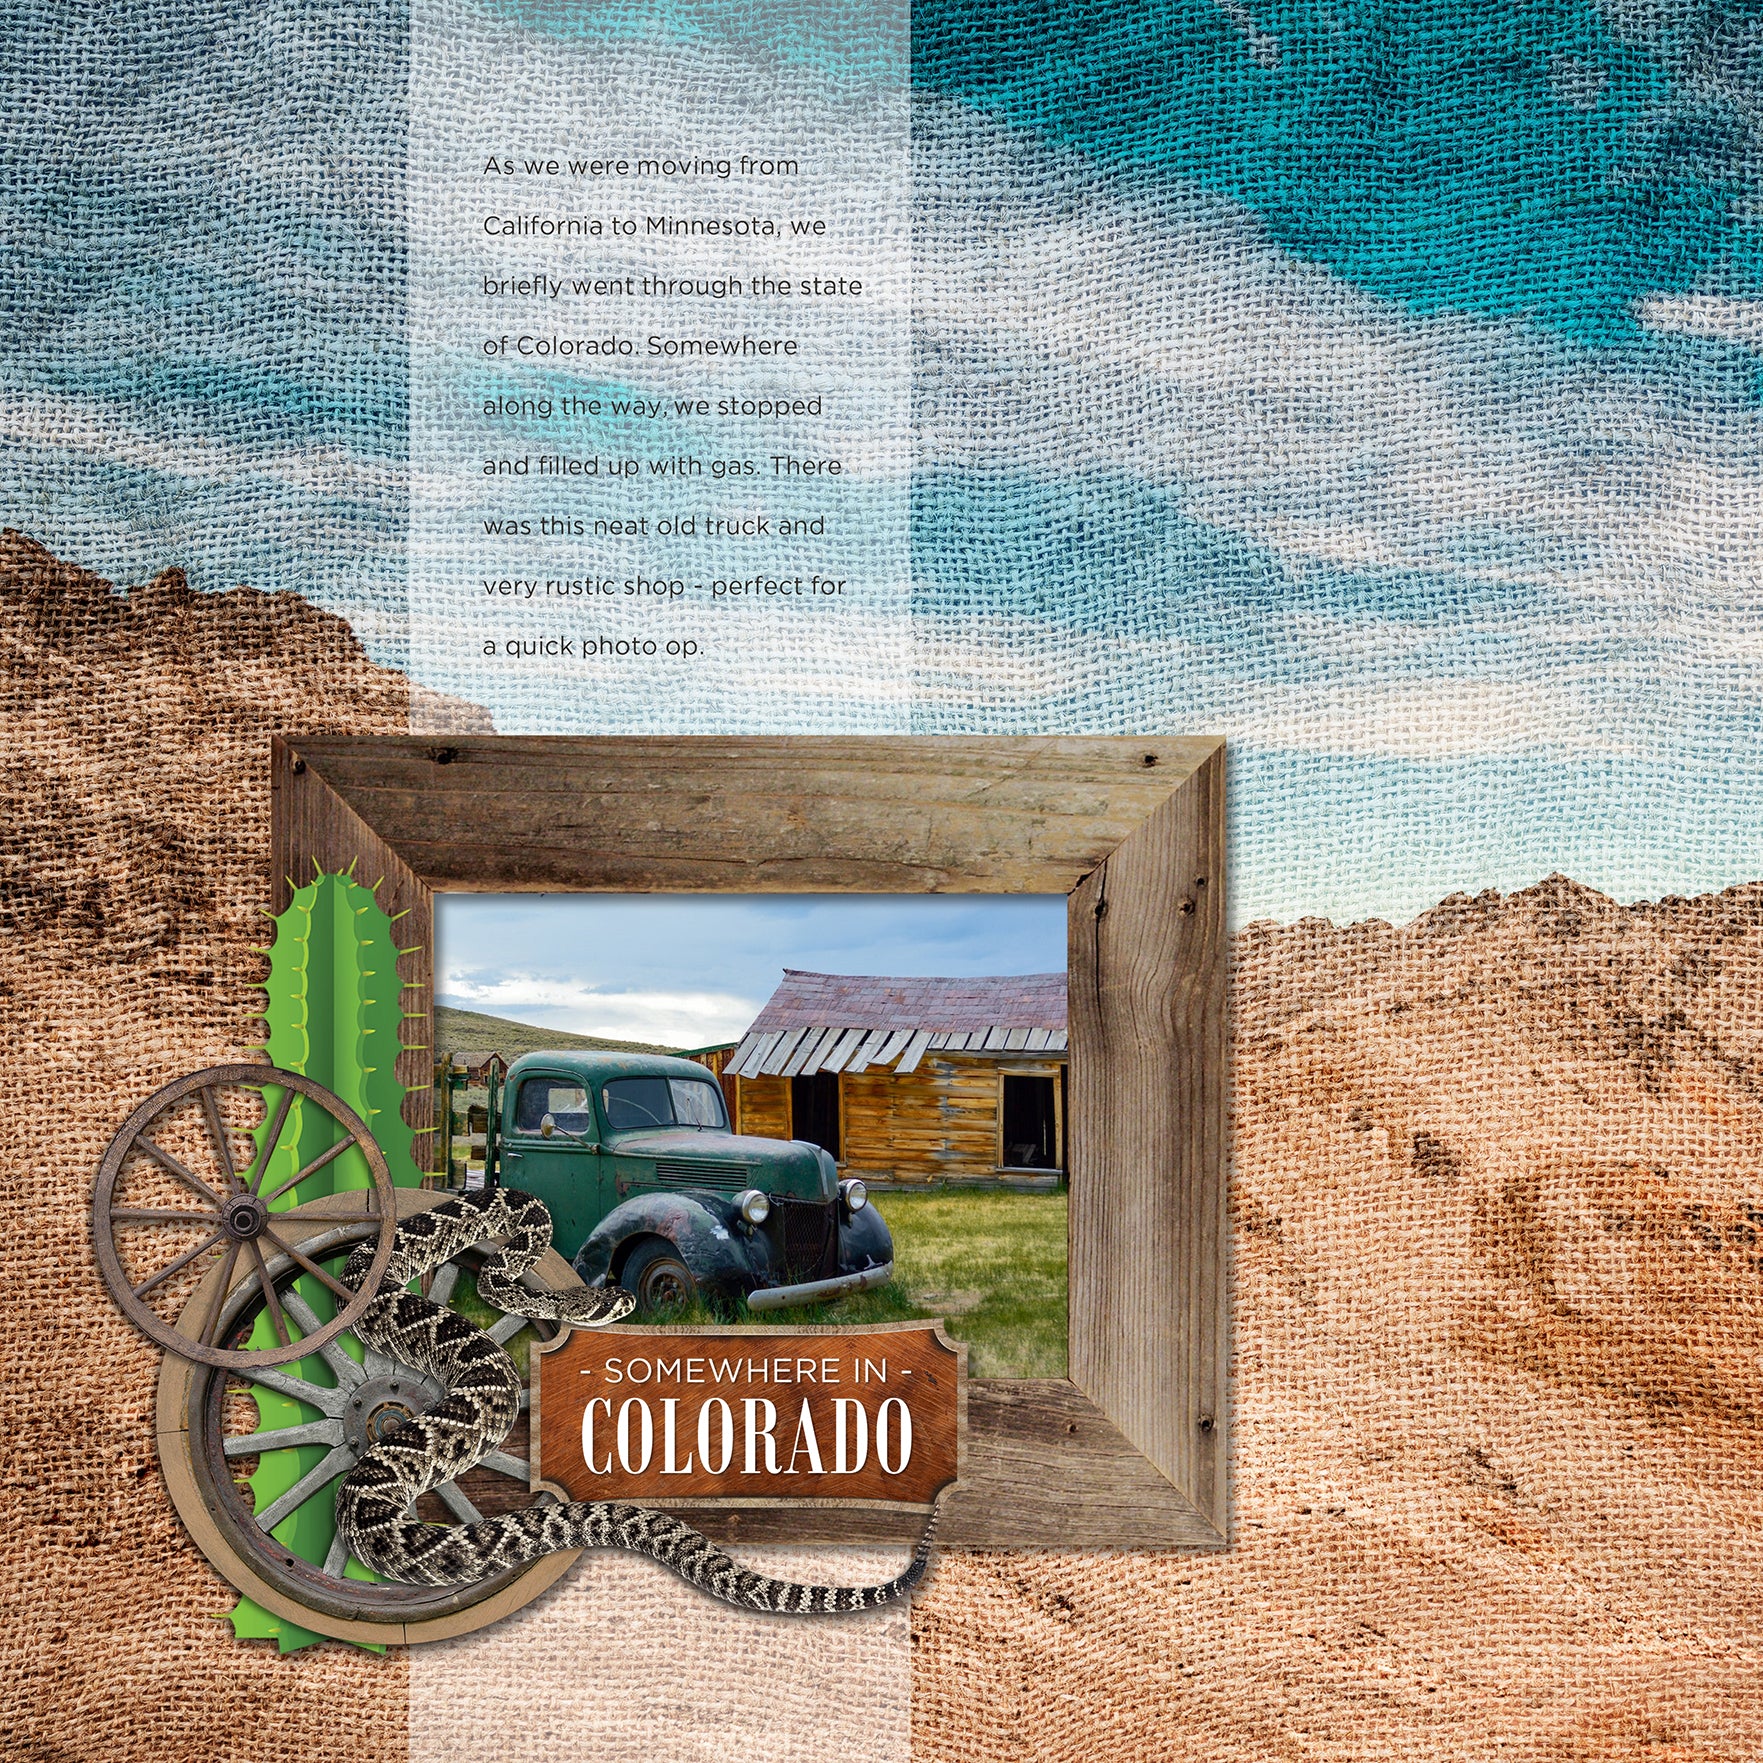 The Wild West Town Digital Scrapbook Kit features authentic western and desert digital art embellishments, papers, clusters, and an alpha set. Easy to use for western-inspired digital scrapbook pages including travels to the Southwest (Arizona, Colorado, Utah, Nevada, New Mexico), cowboy and cowgirl dances and hoedowns, rodeo and ranch events, ghost towns, vacations to the desert, Mexico, and so much more!